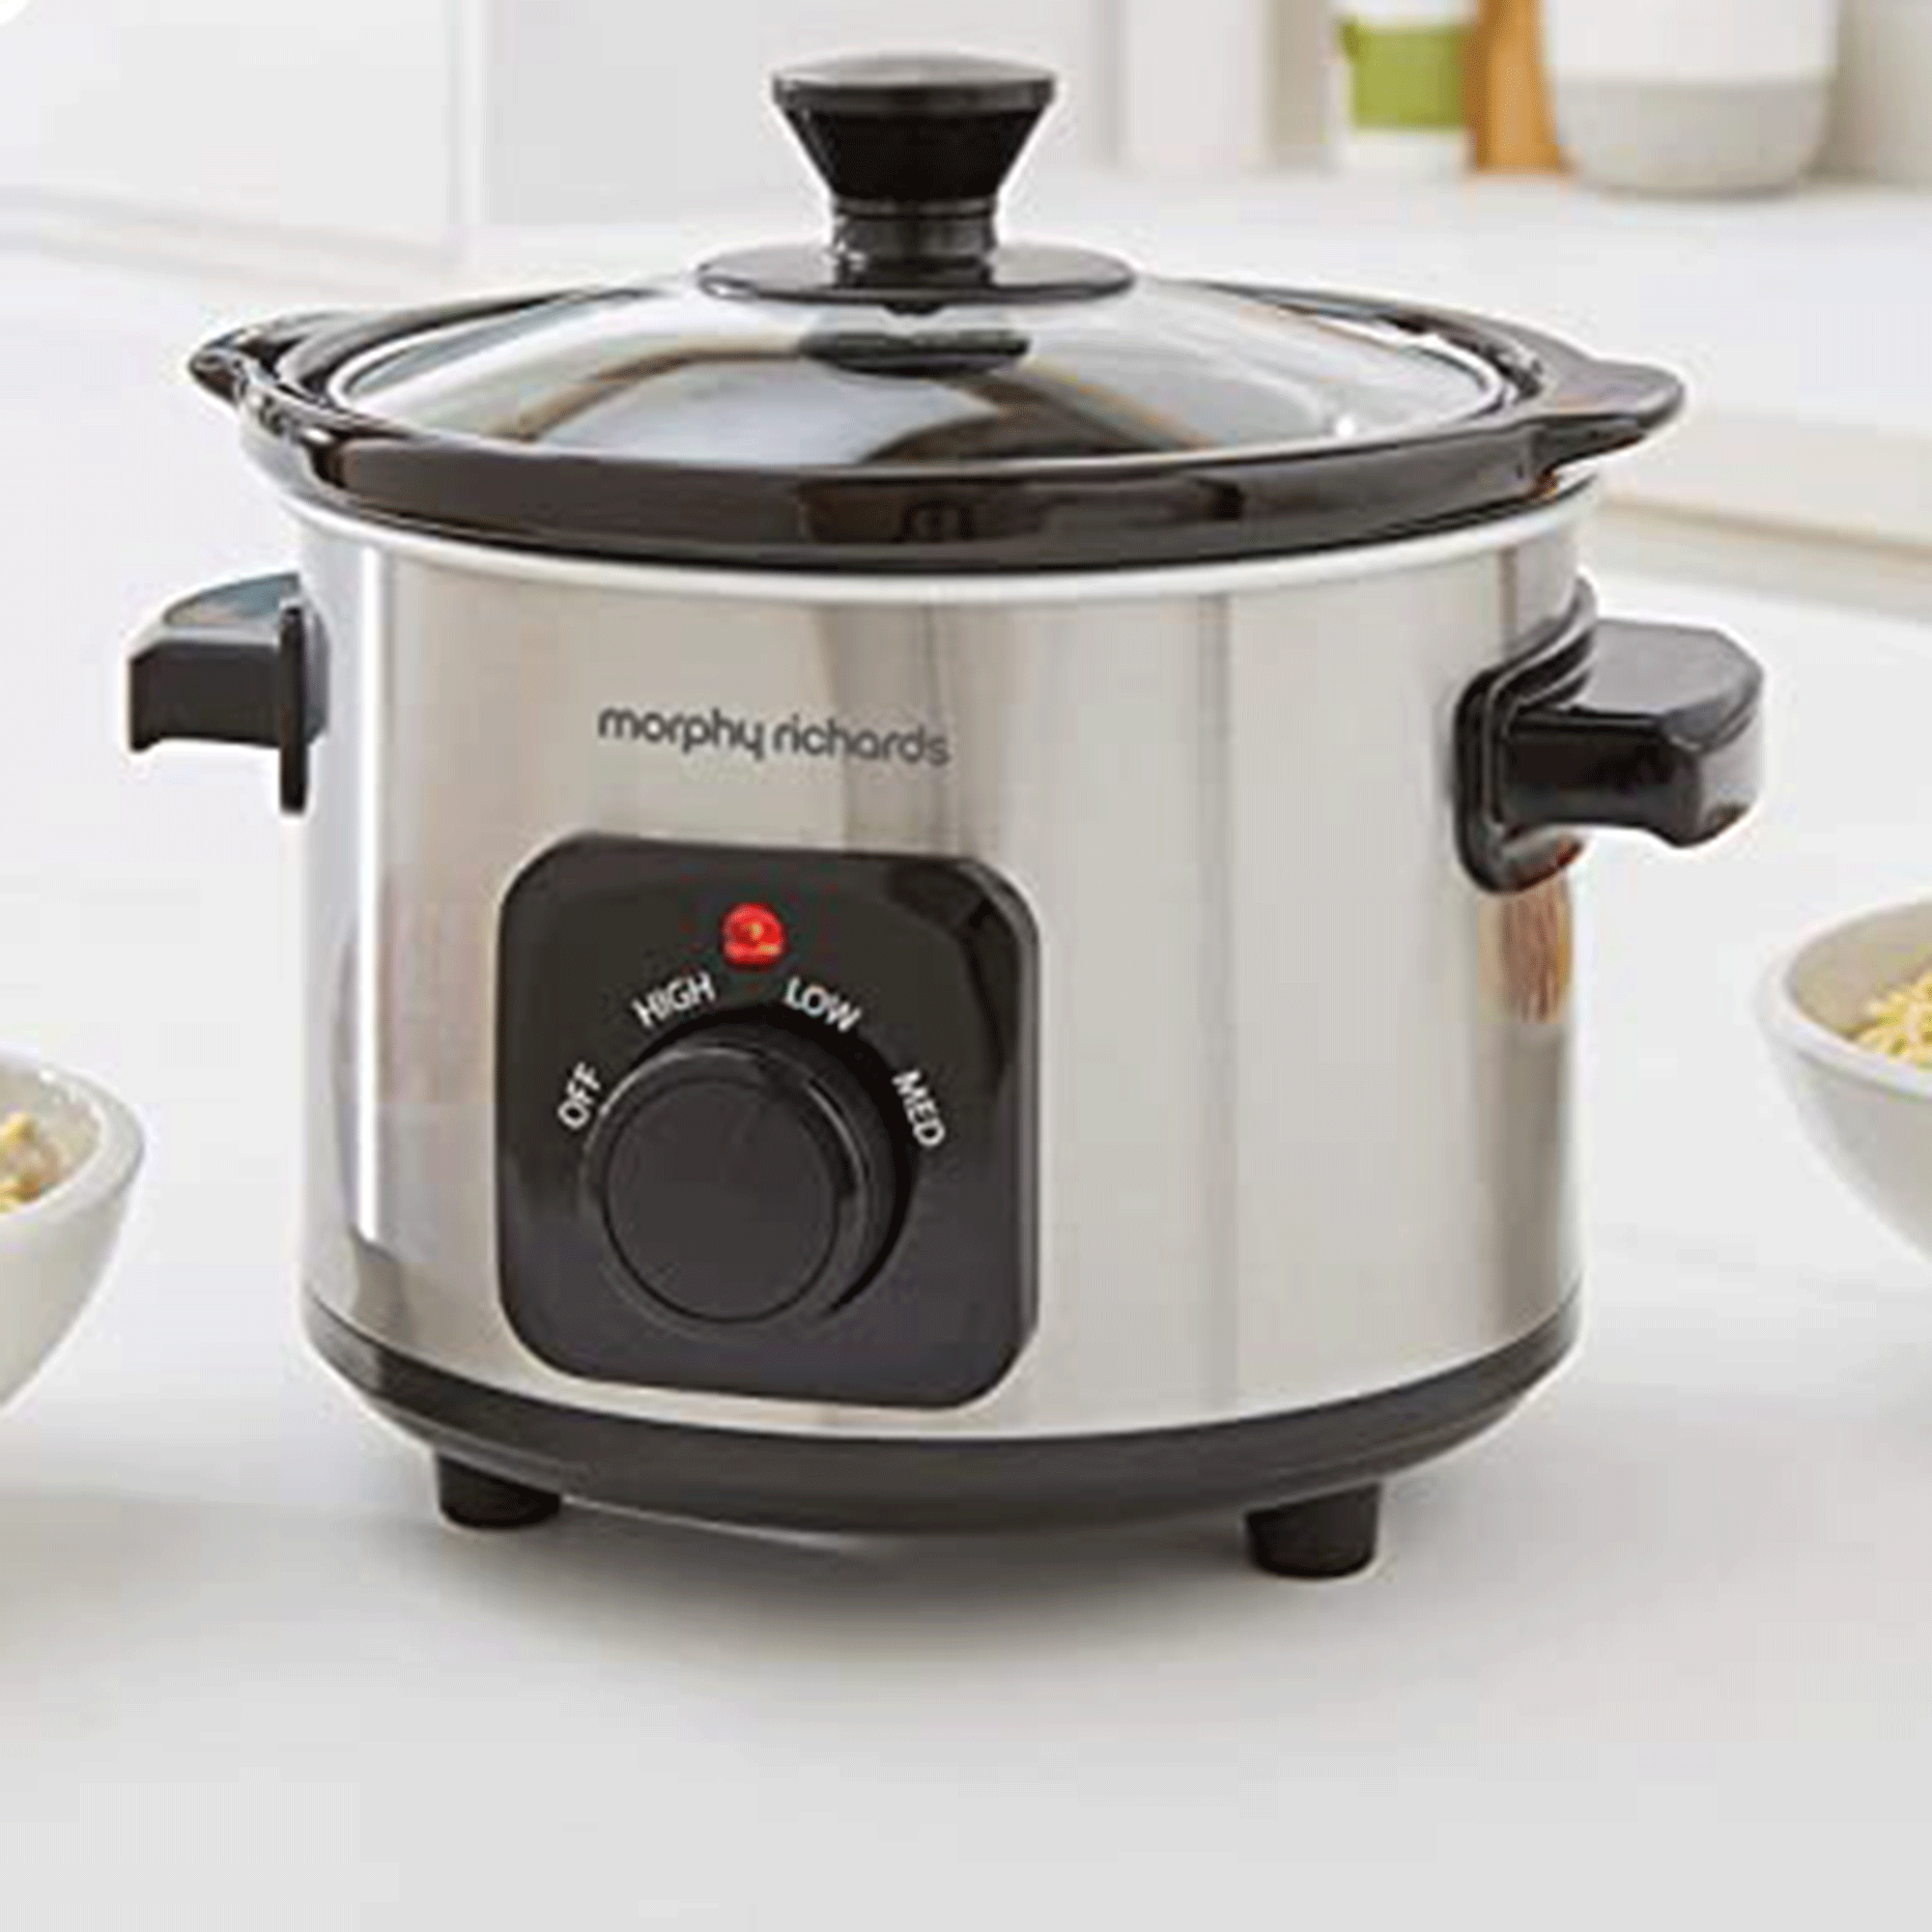 Silver slow cooker